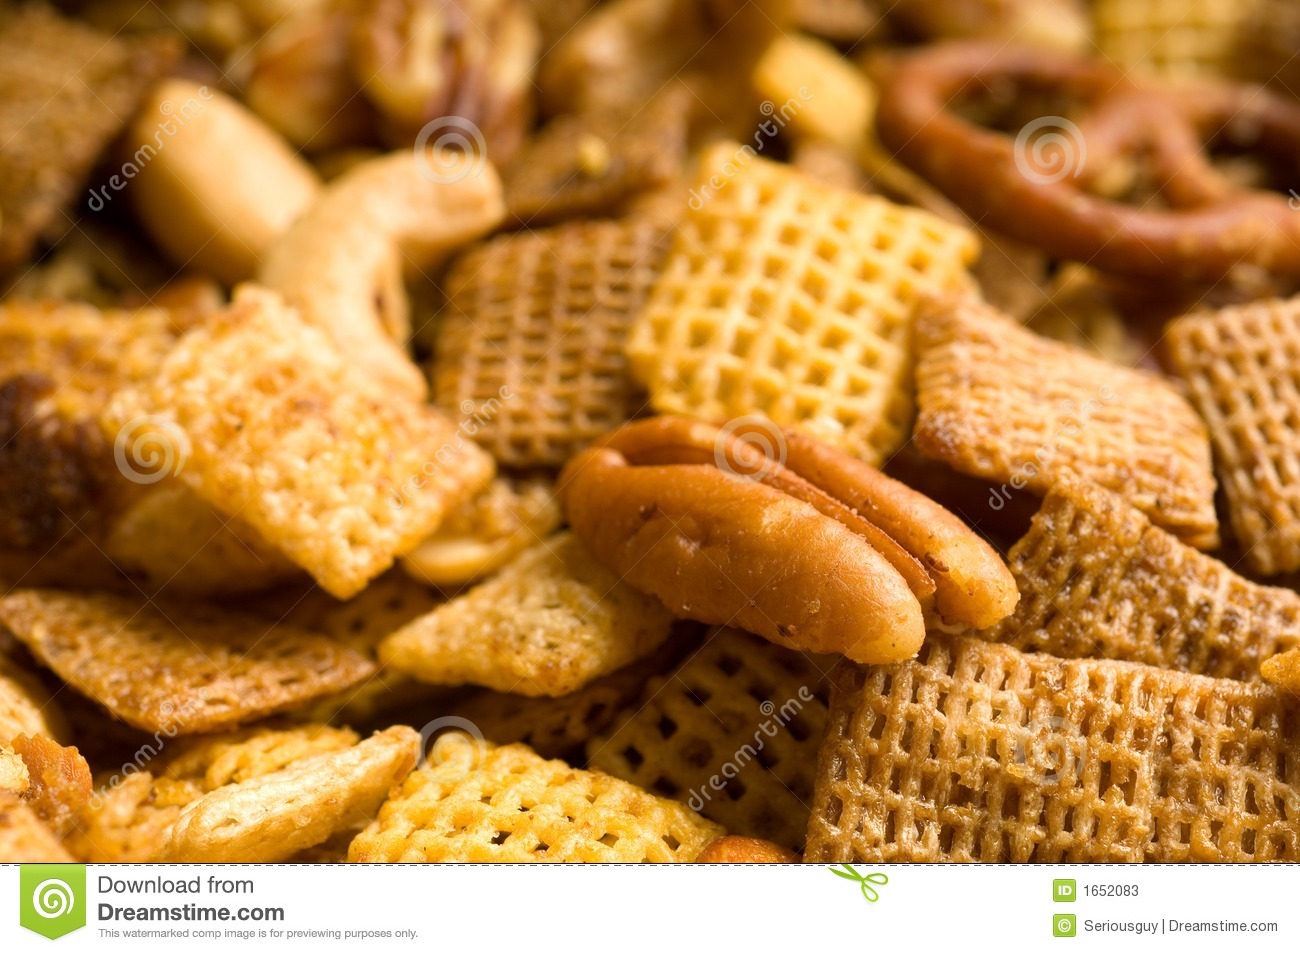 Up Of Cereal Pretzel And Nut Snack Mix Background With Limited Dof